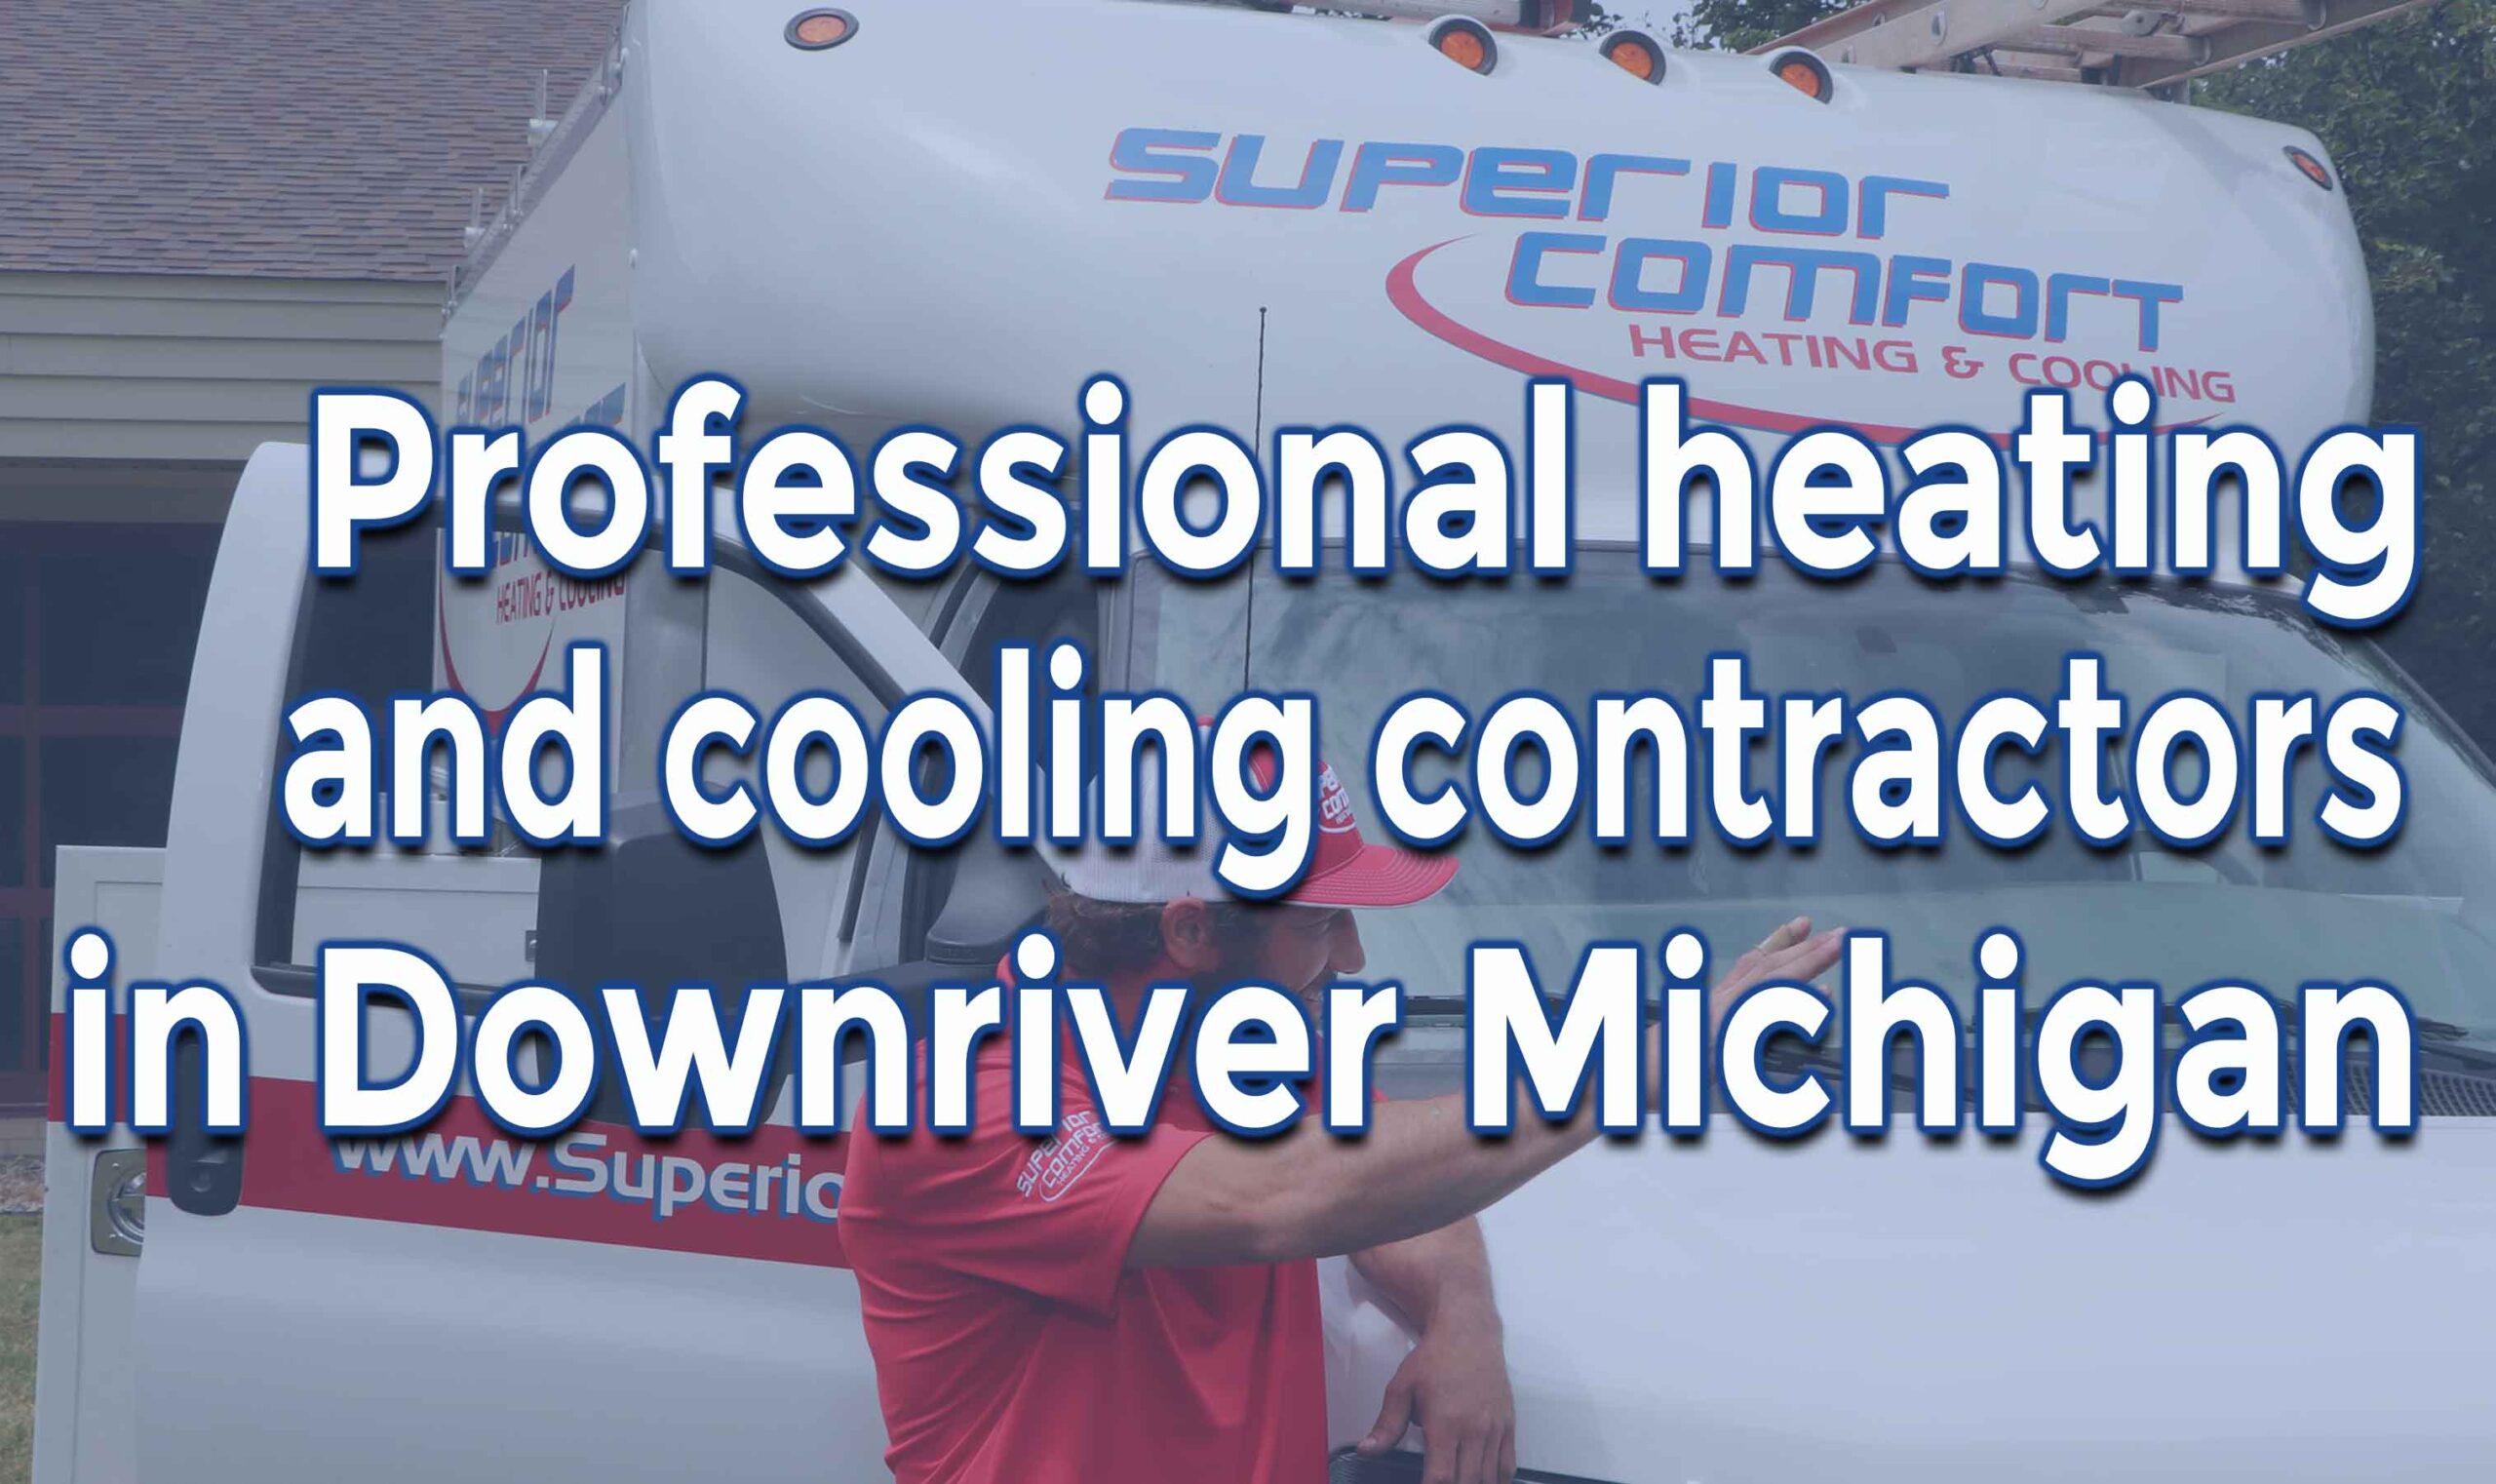 Professional heating and cooling contractors in Downriver Michigan